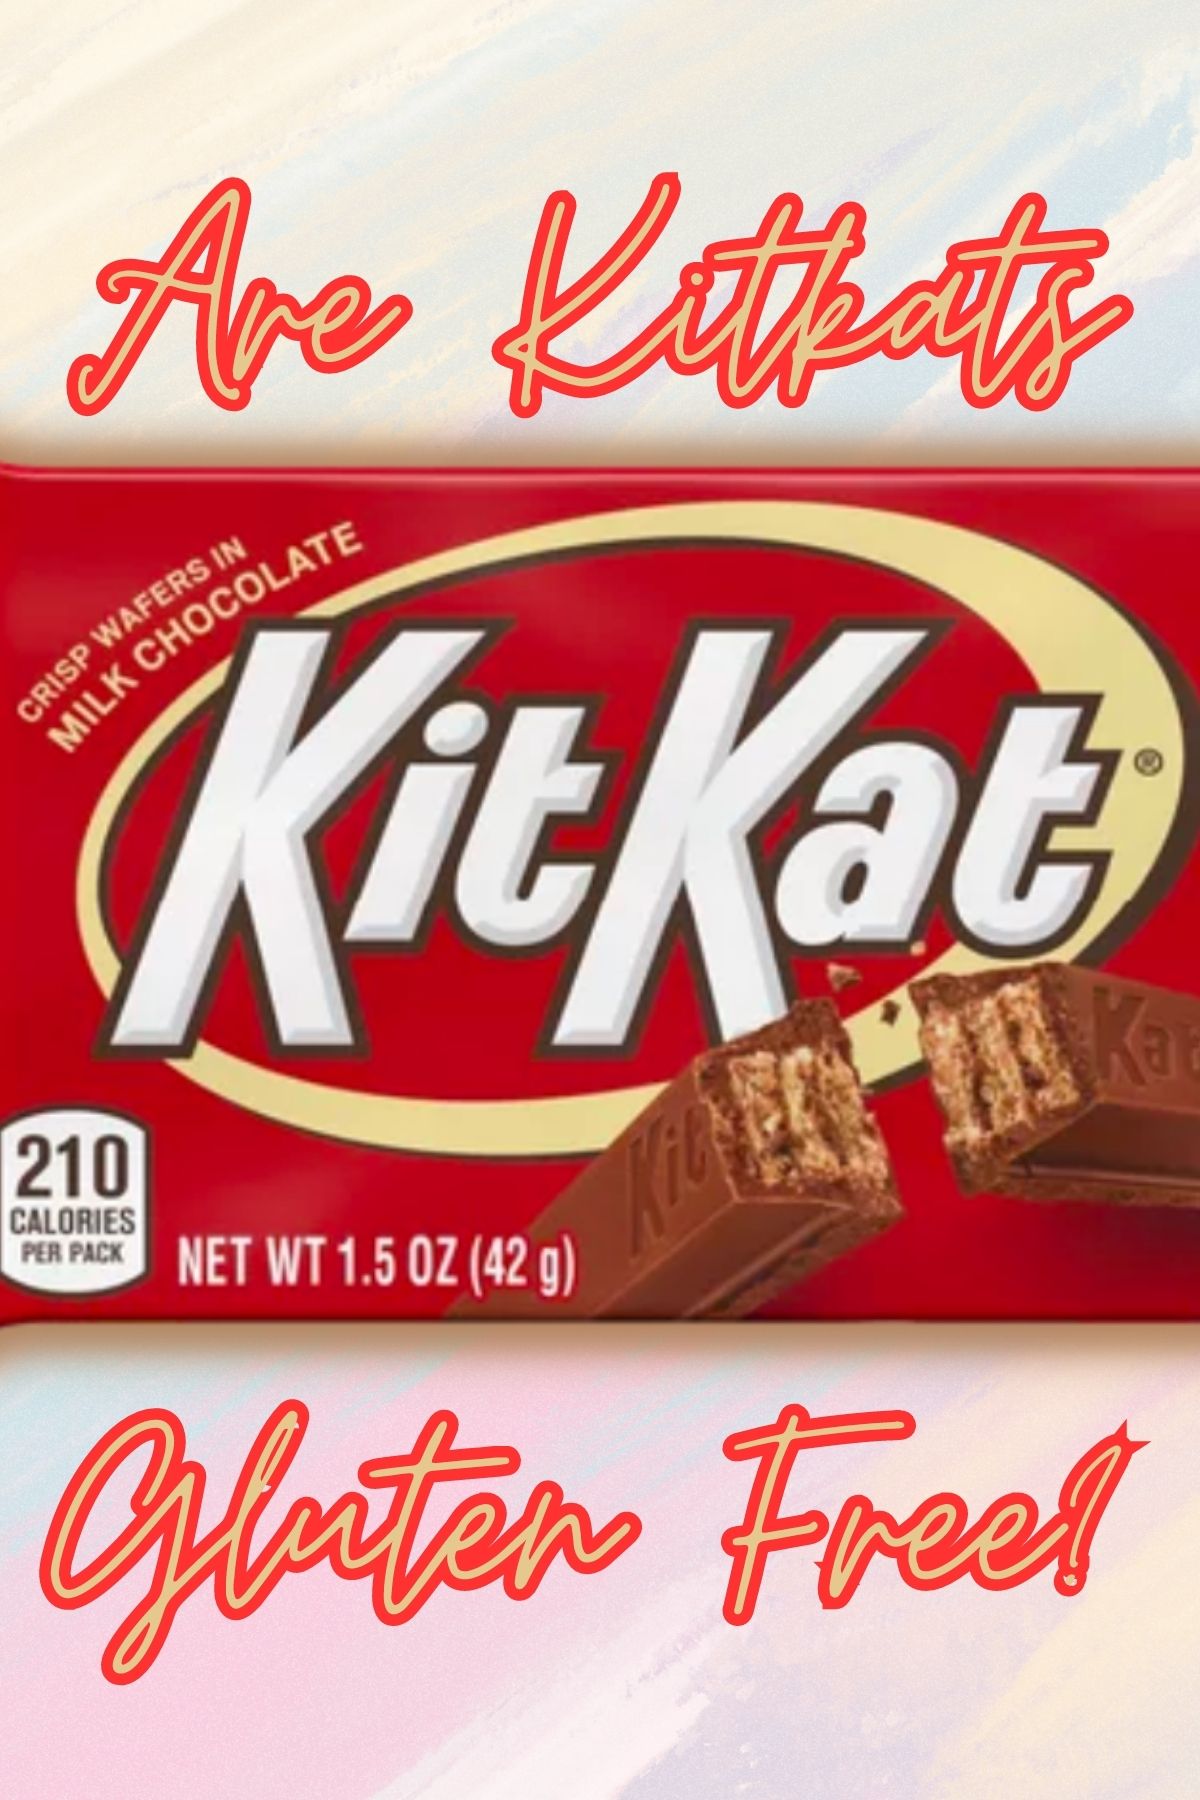 Is Kit Kat Gluten Free? What you Can and Cannot Eat